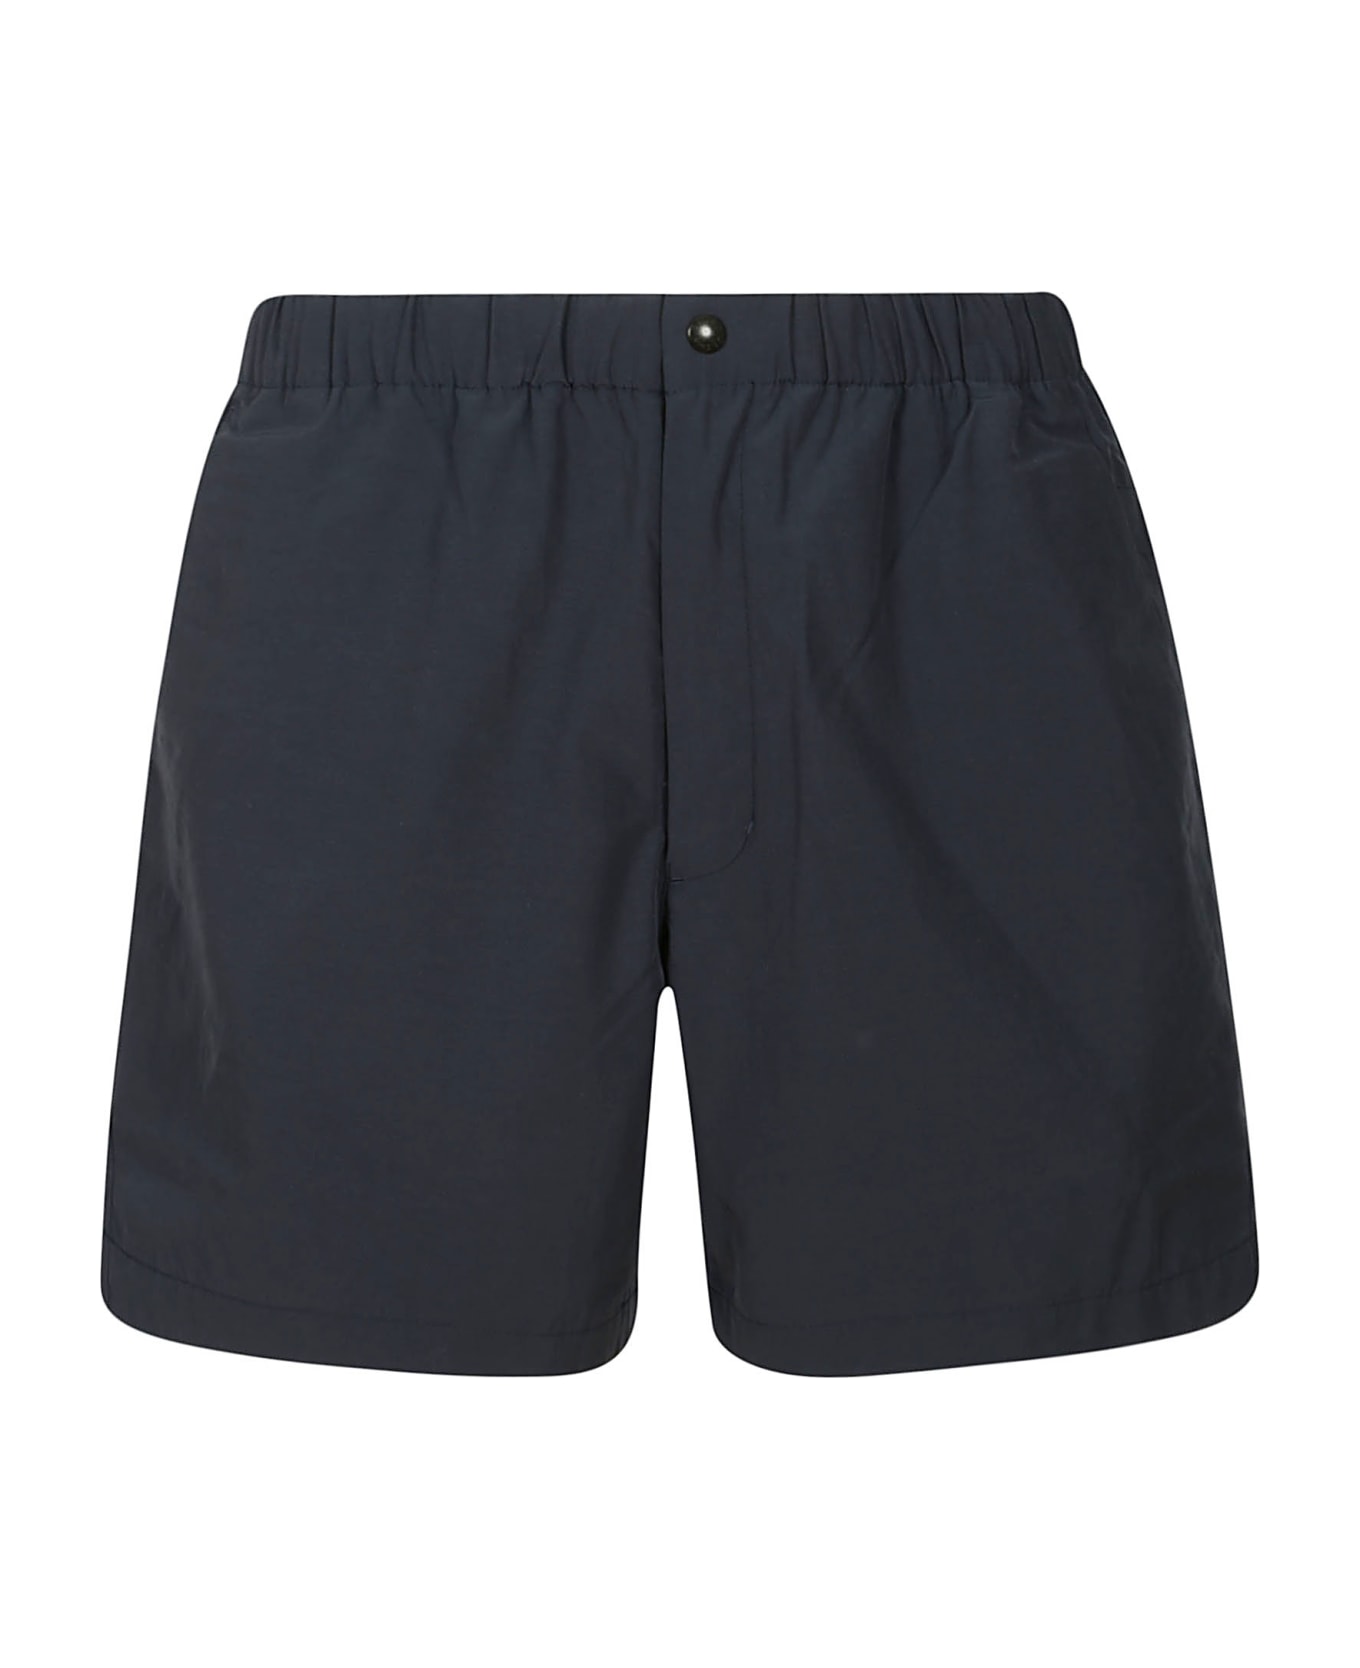 Goldwin Easy Wide Shorts - Sx Space Navy ショートパンツ